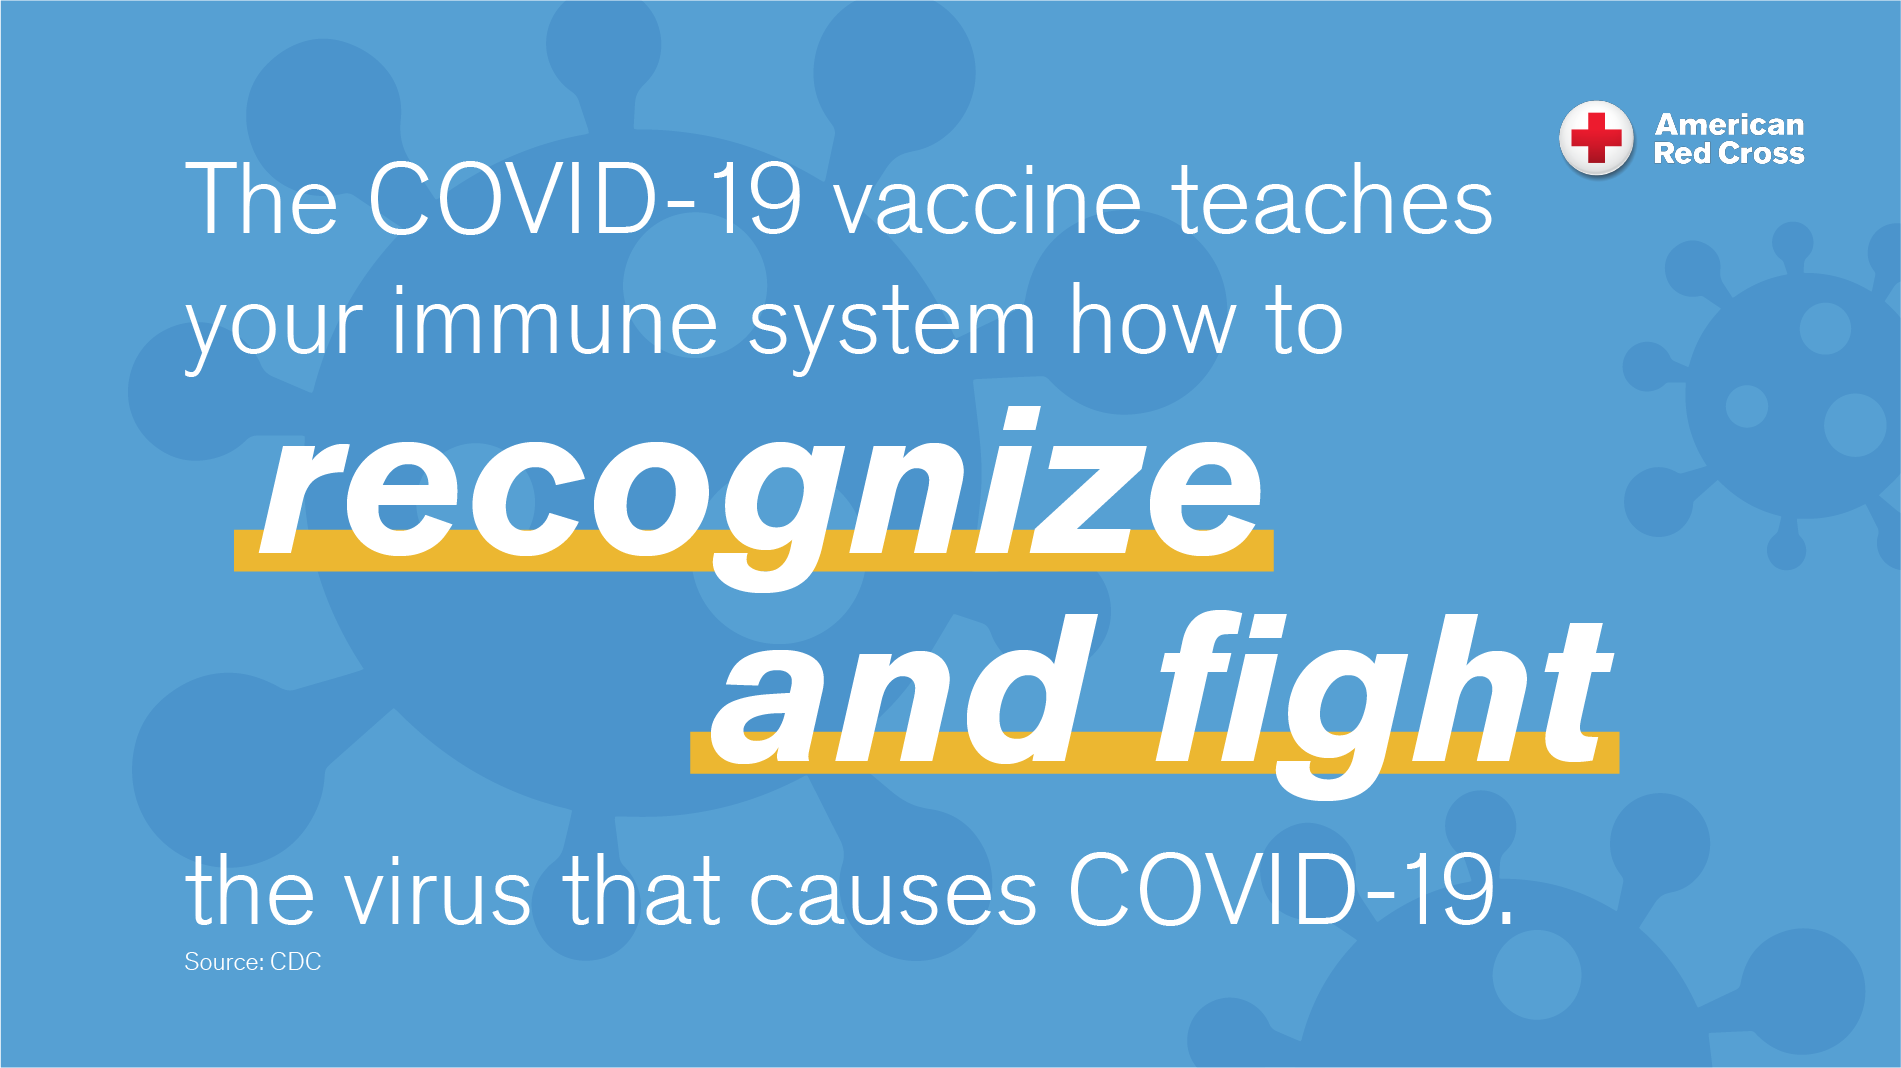 The COVID-19 vaccines are effective at keeping you from getting COVID-19